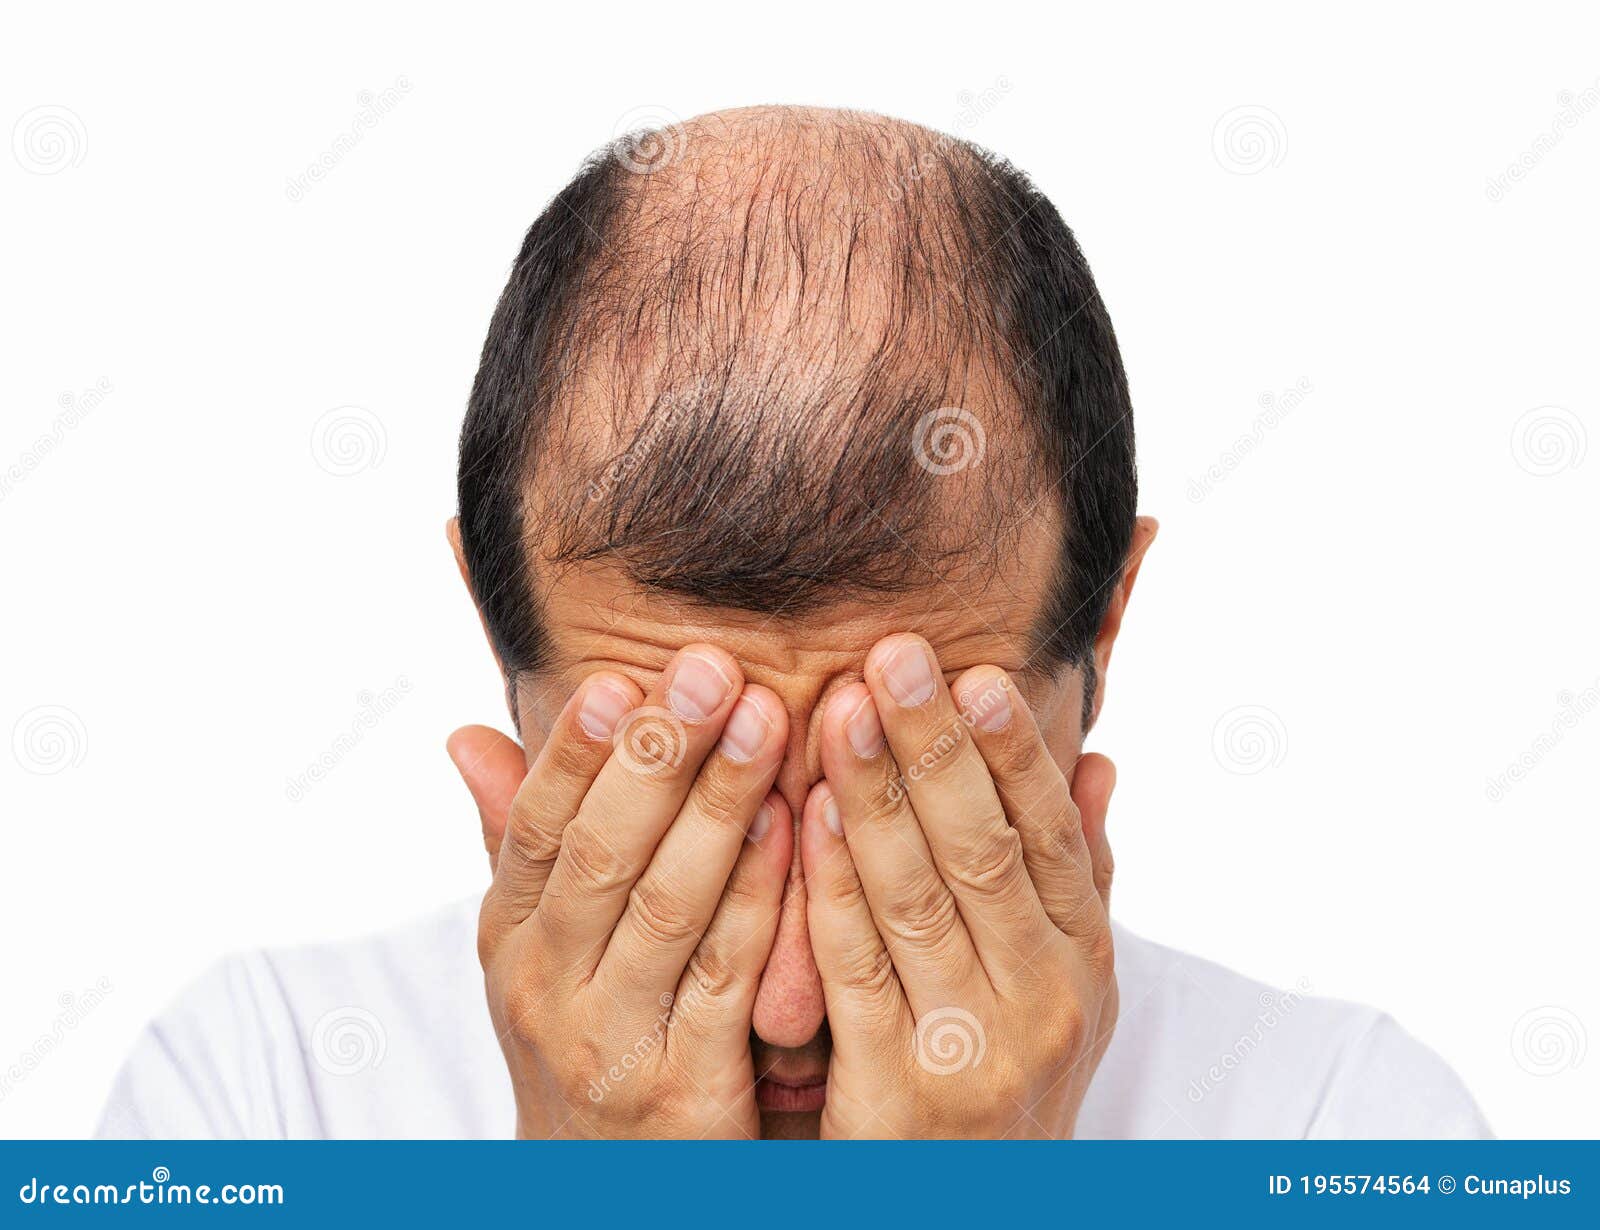 Bald Man Stressed by Rapid Hair Loss Stock Photo - Image of crying, afraid:  195574564